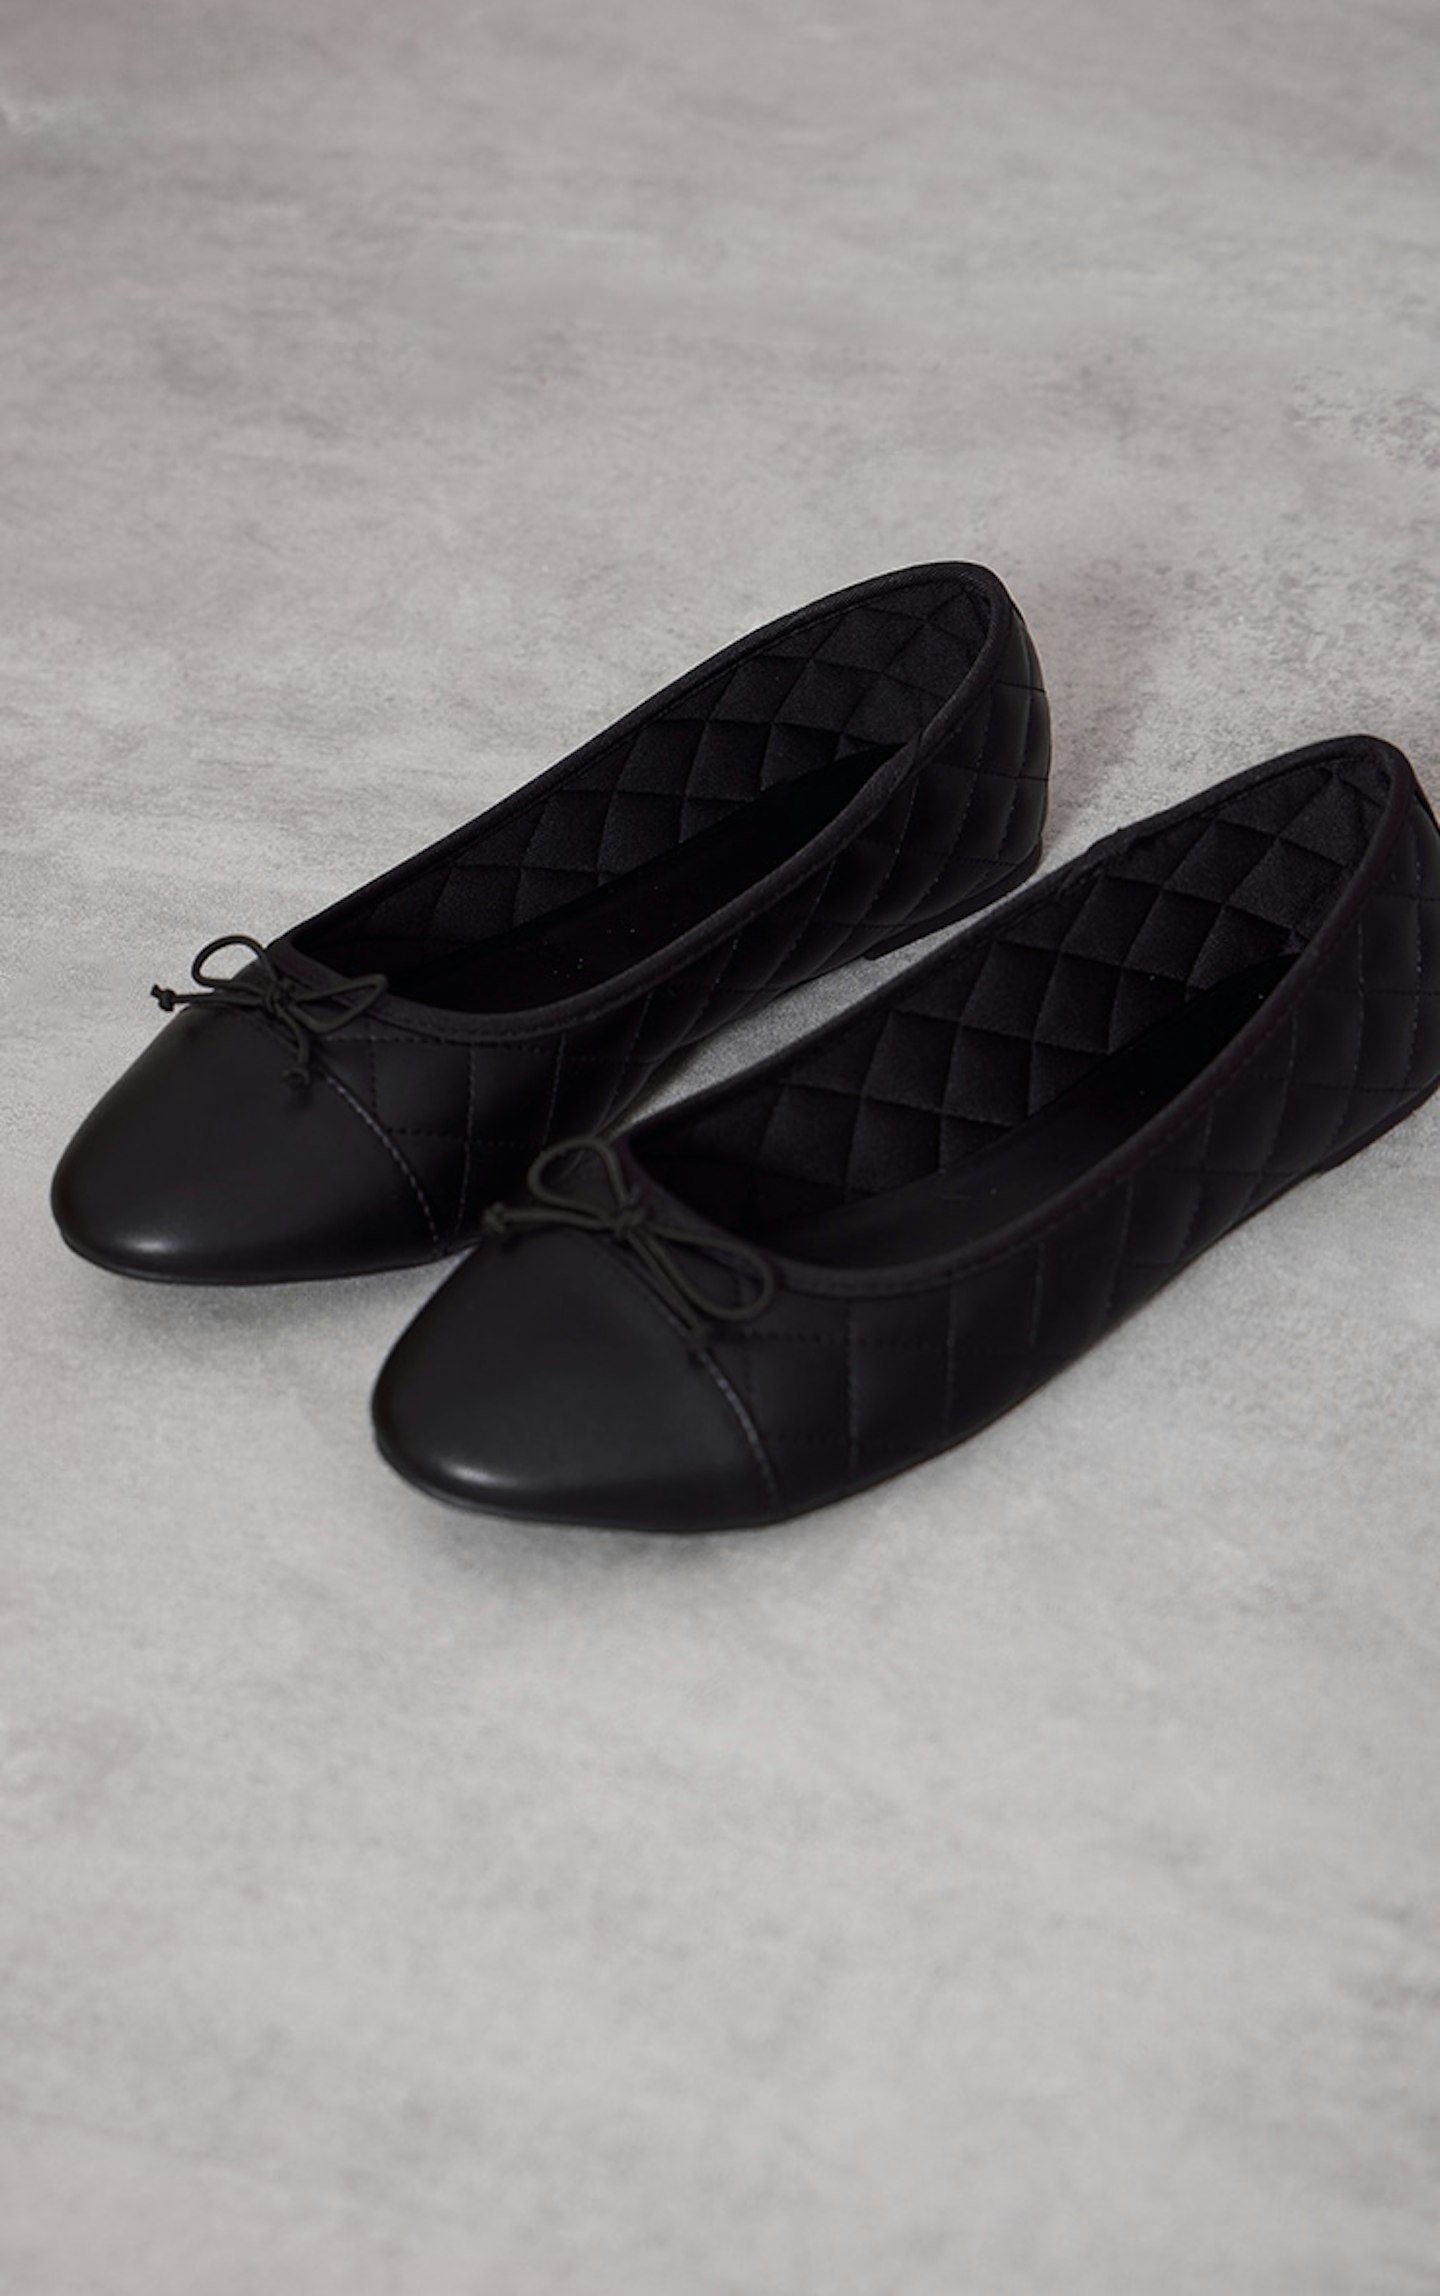 Pretty Little Thing Black Bow Quilted Ballet Pumps